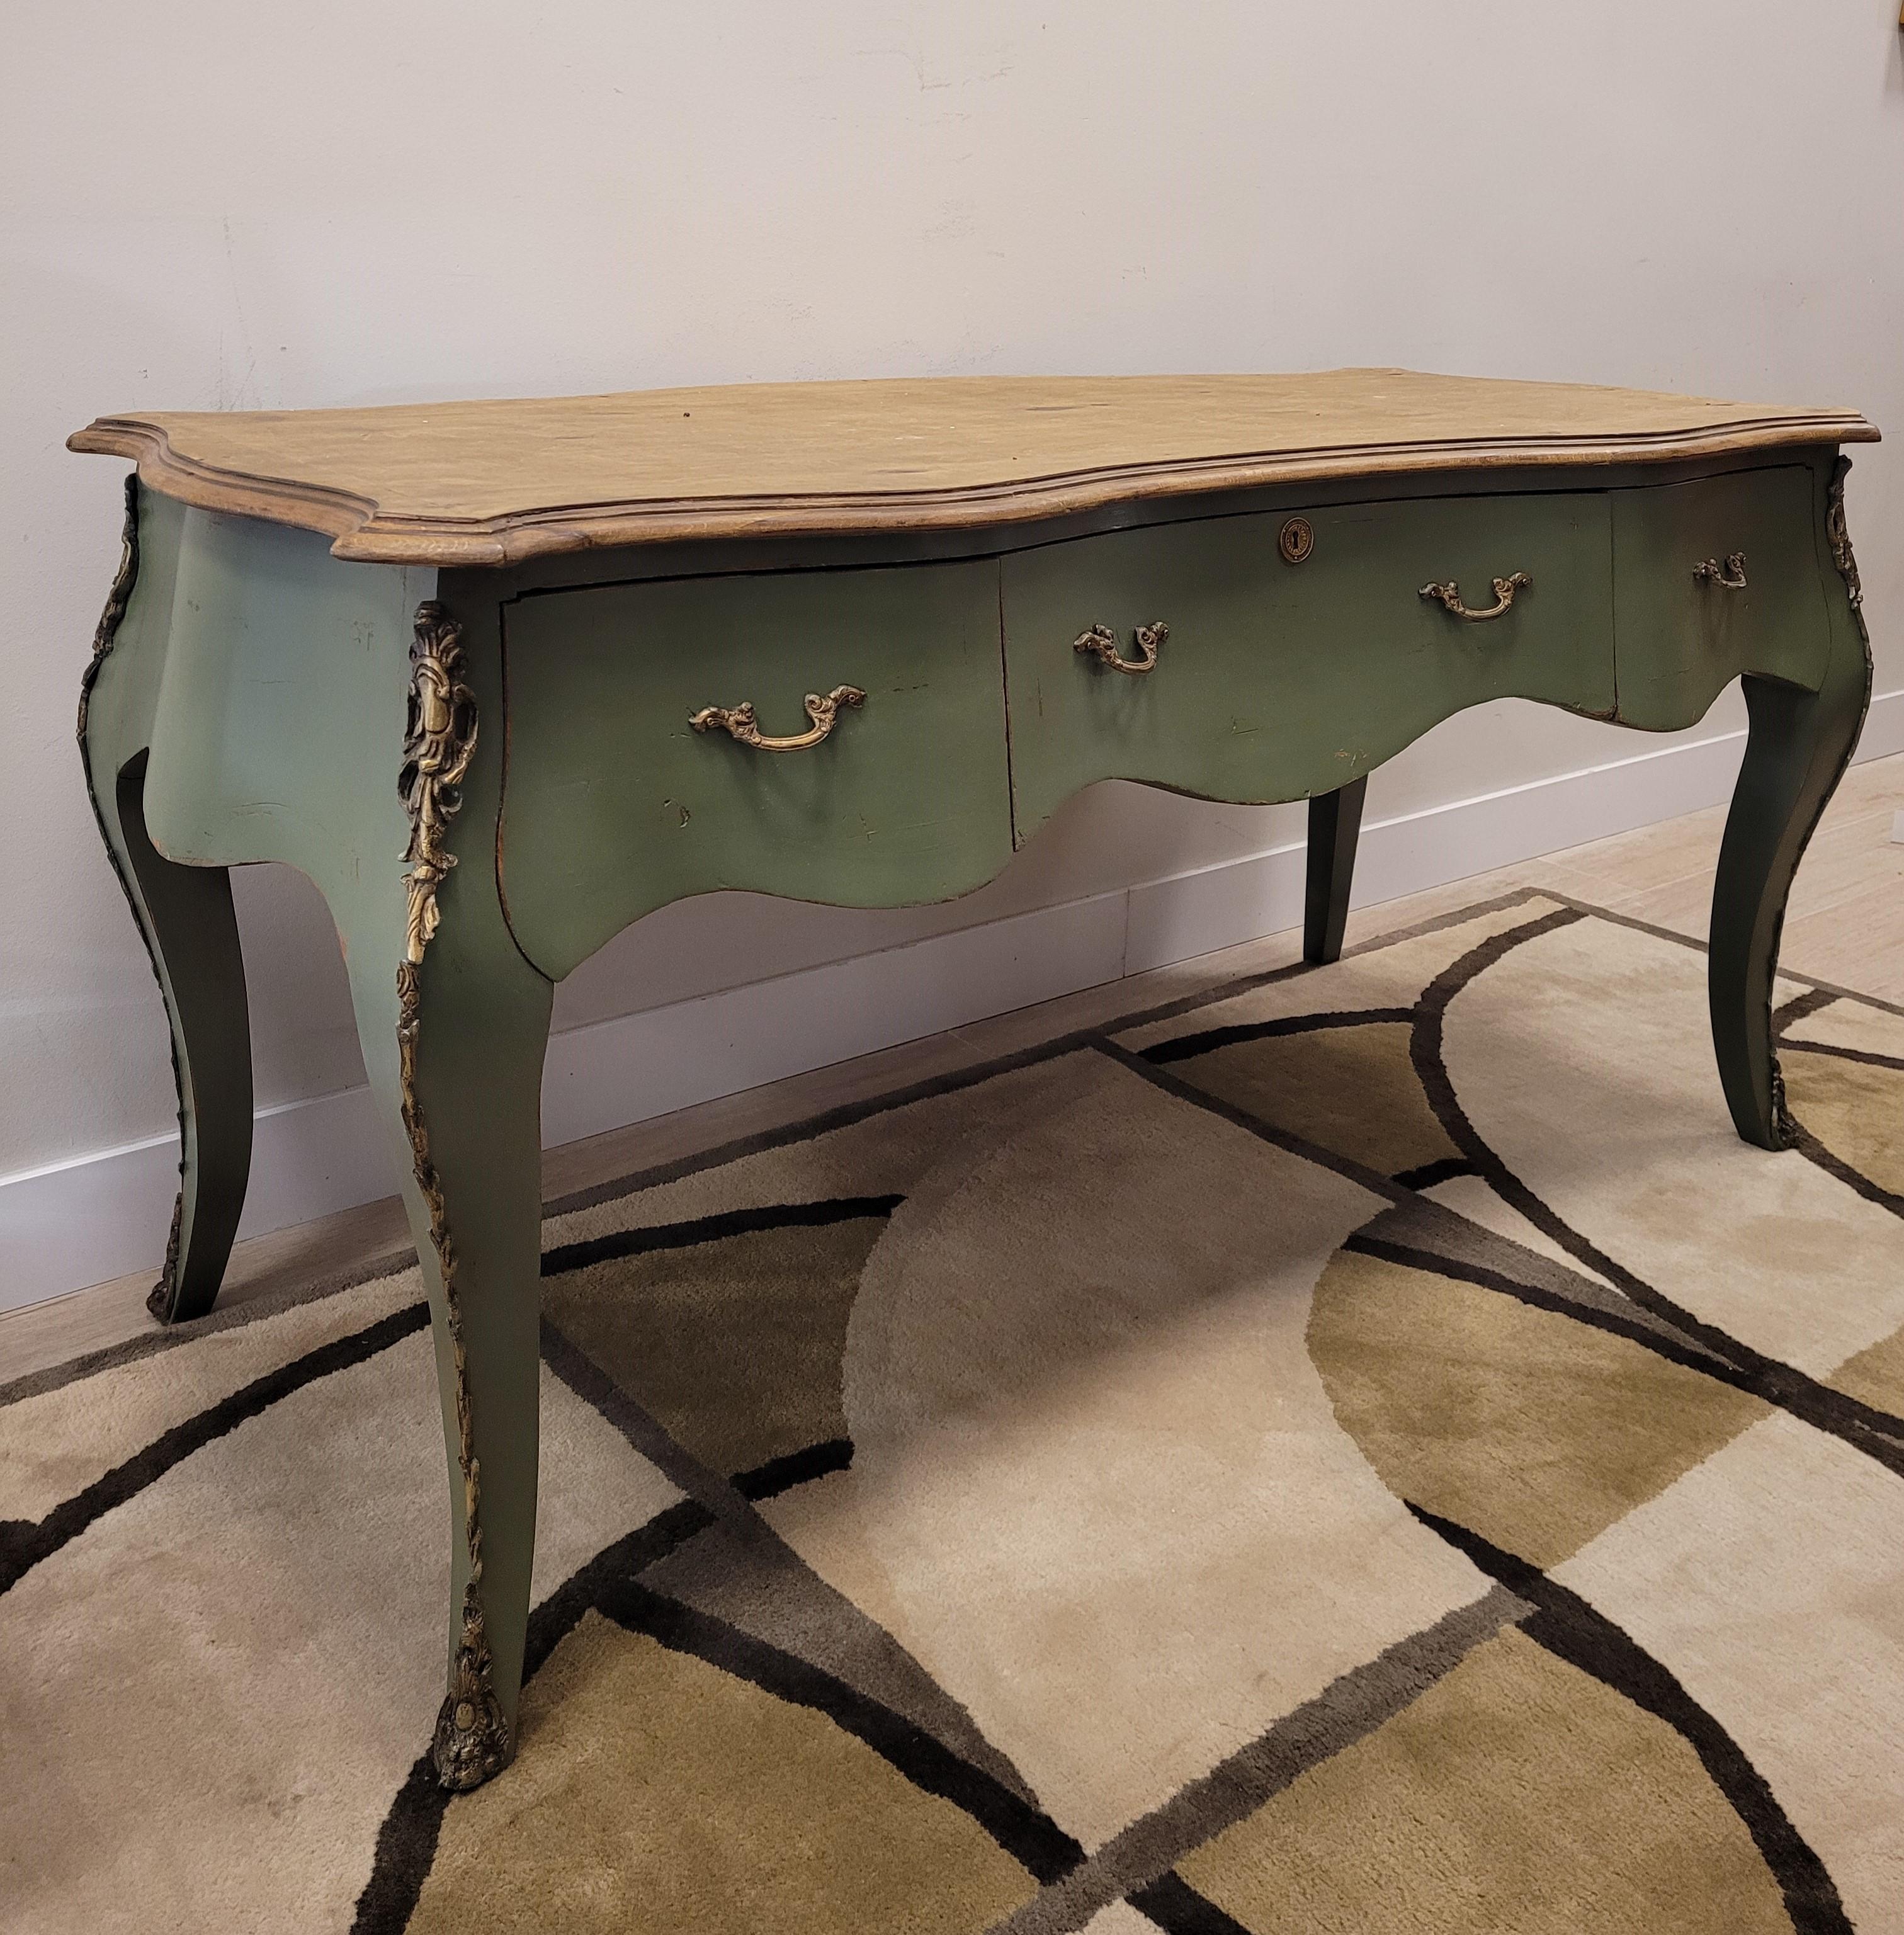 Provençal Green Center Console  table, polychrome, 50's - 60's - France For Sale 2